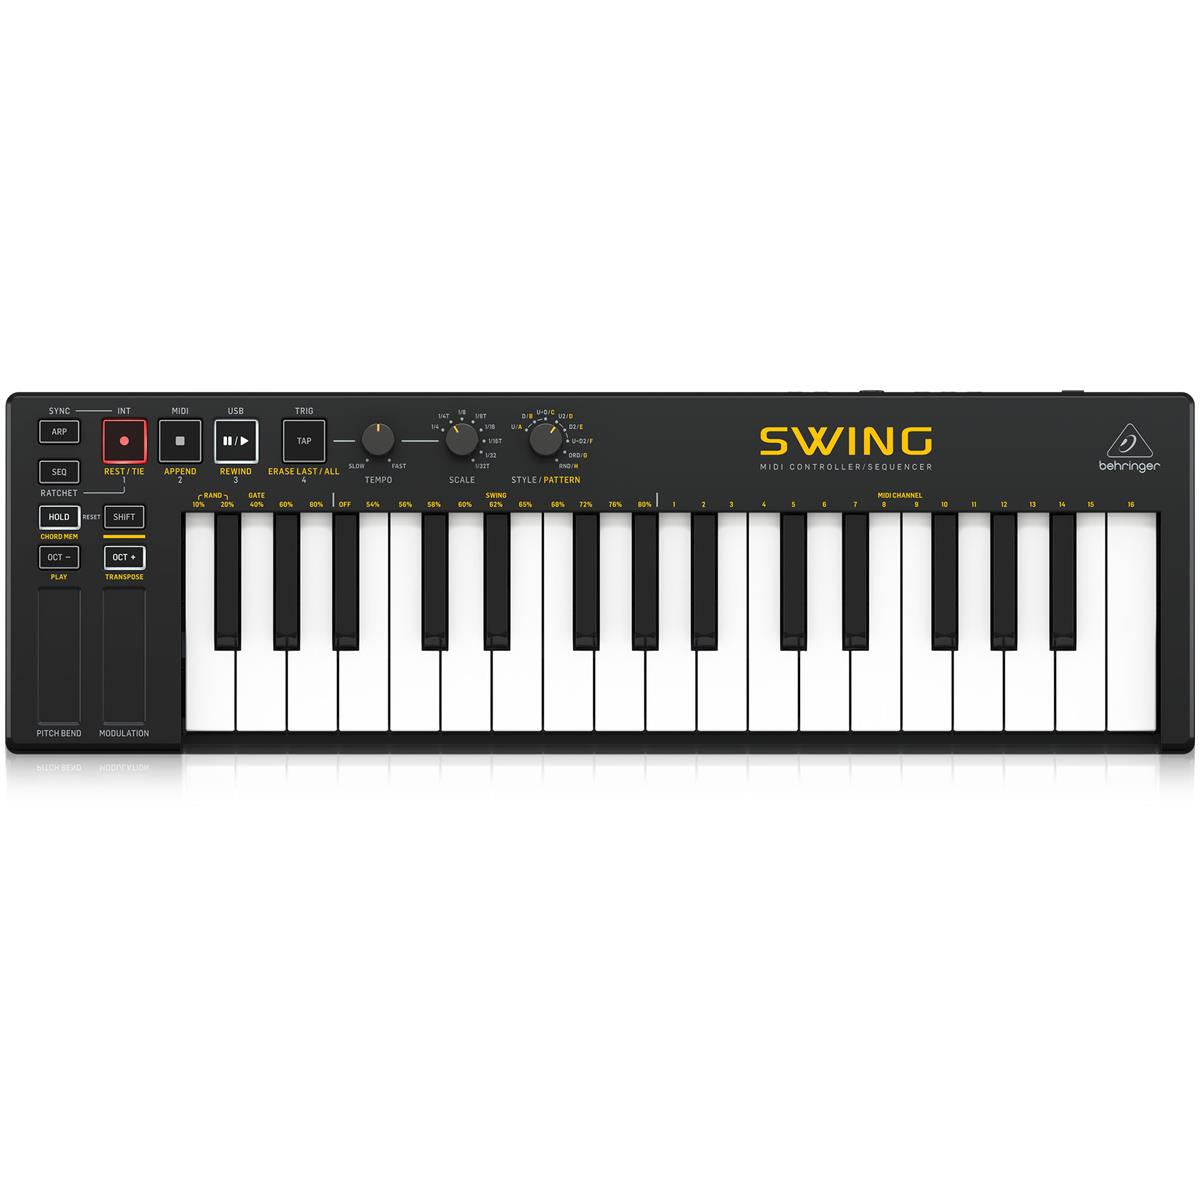 Image of Behringer SWING 32-Key USB MIDI Controller Keyboard with 64-Step Sequencer